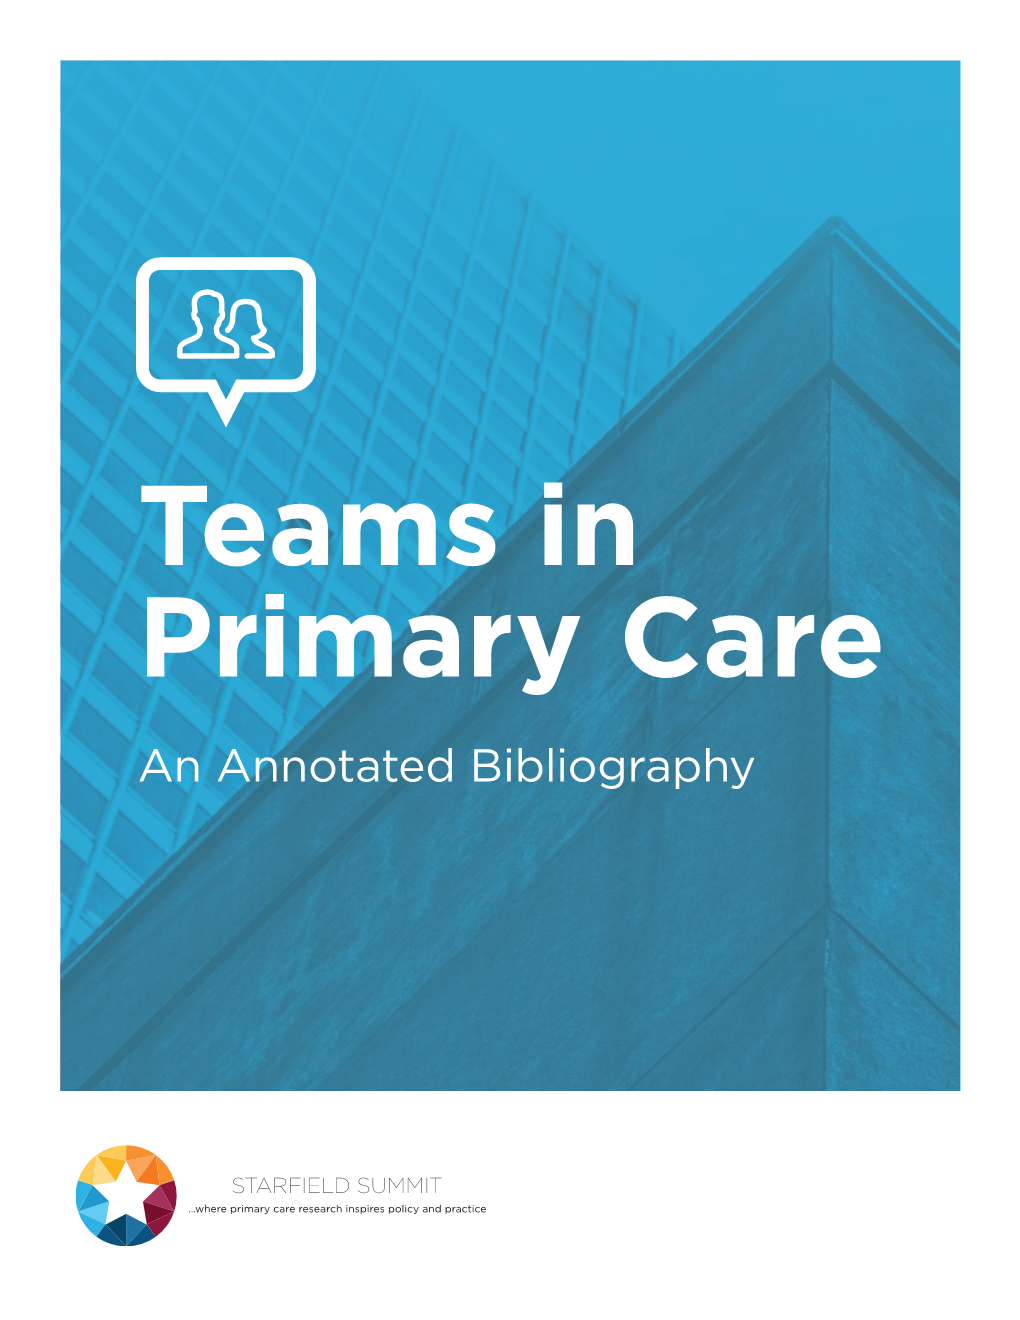 Teams in Primary Care Annotated Bibliography